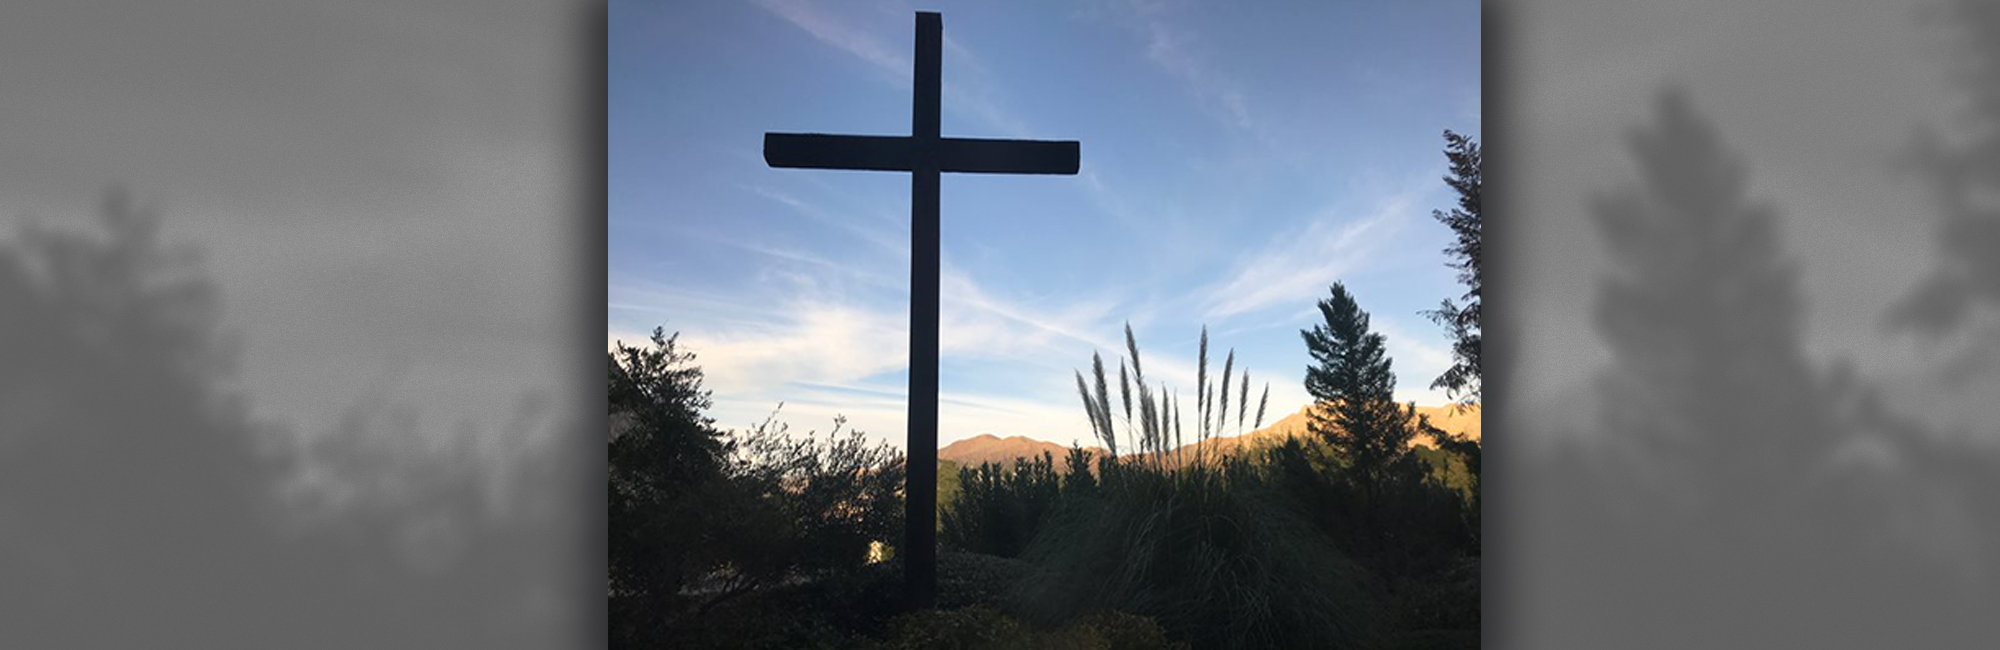 View from the sanctuary of University Presbyterian Church in El Paso, Texas. Photo by Teresa Waggener.